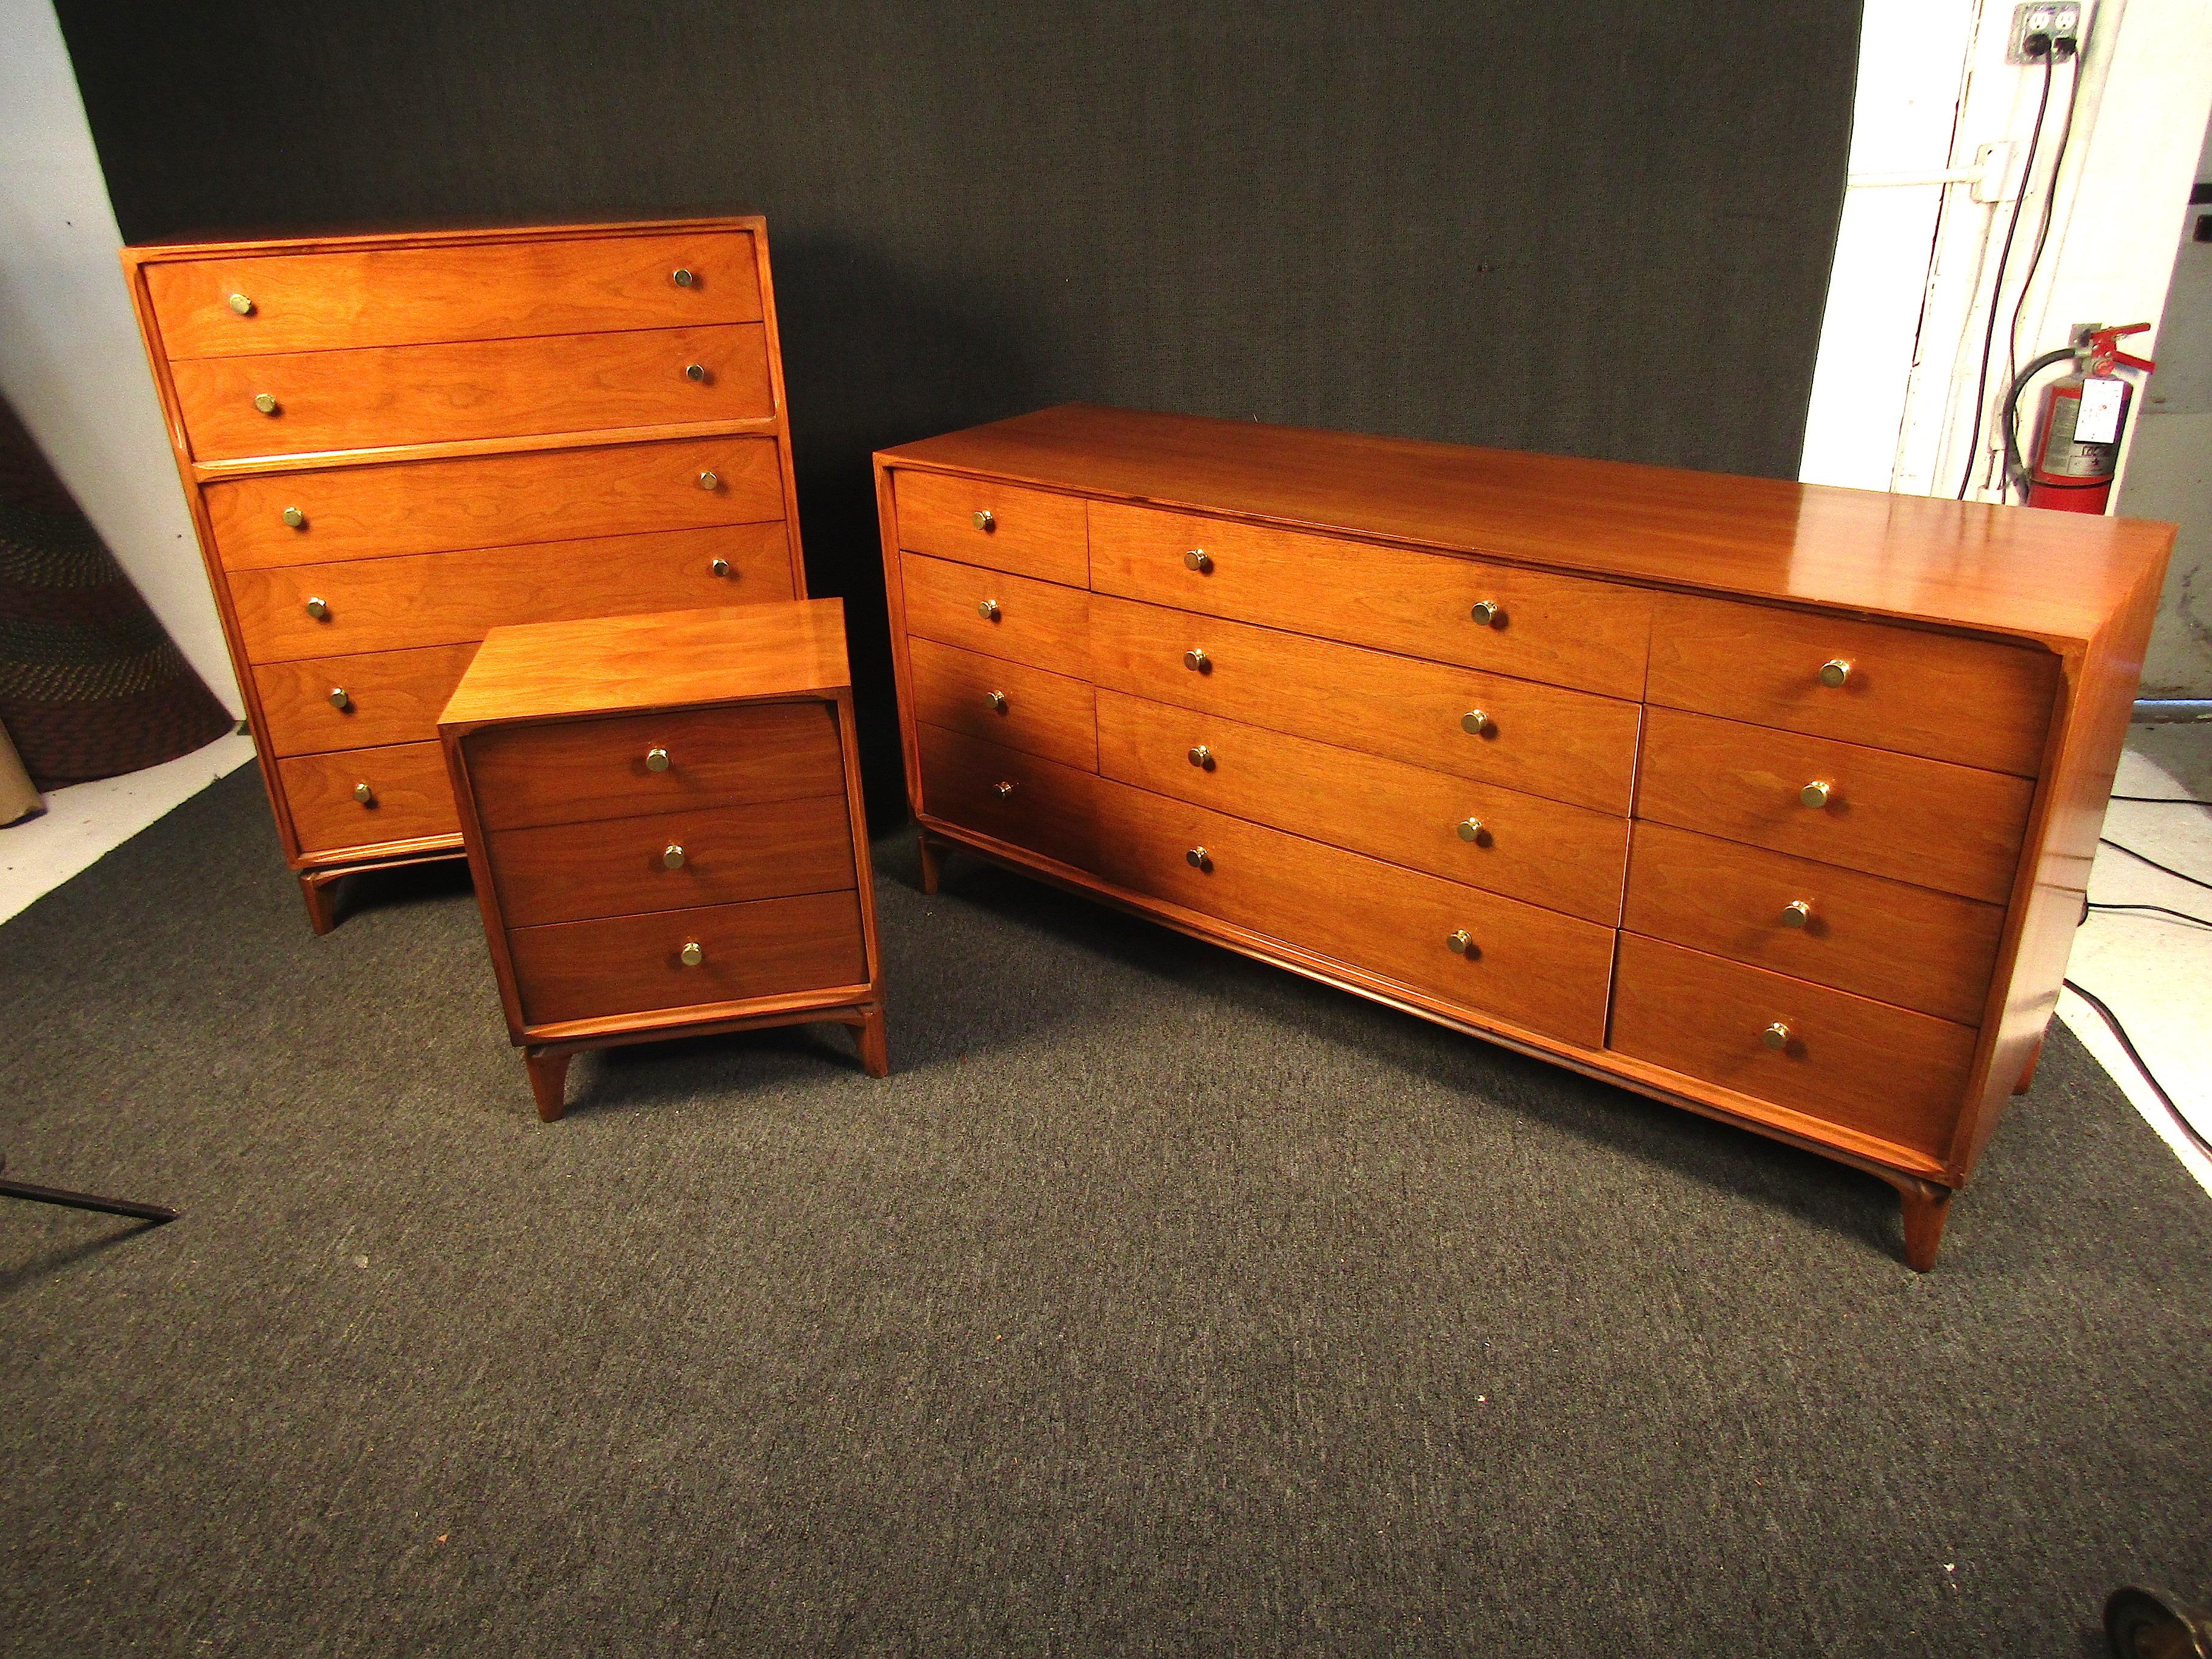 This beautiful bedroom set features deep grain teak wood and a simplistic design that will fit perfectly with any home. With warm accents and plenty of drawer space, this classic bedroom set will be a cherished set for years to come. Please confirm